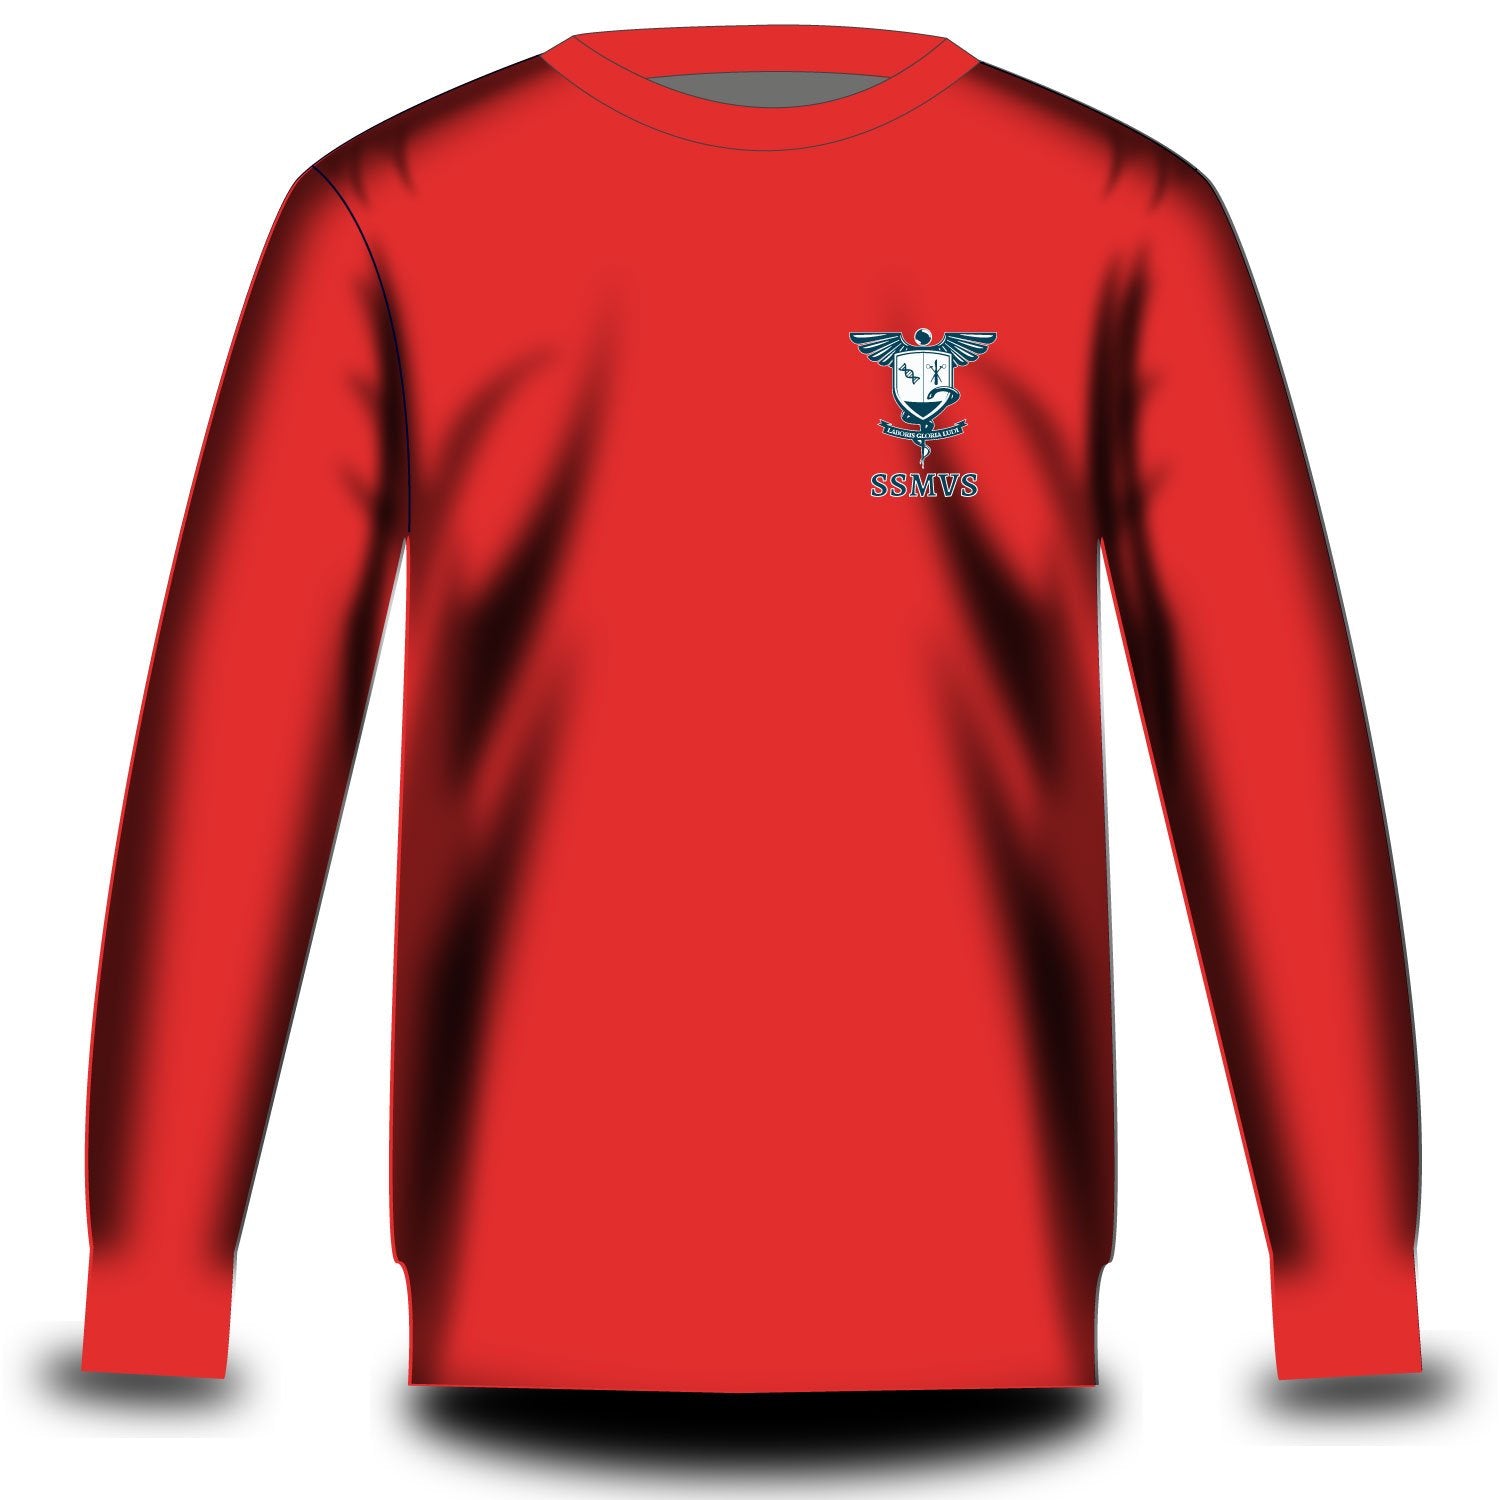 sidney sussex medical and veterinary society sweatshirt fire red